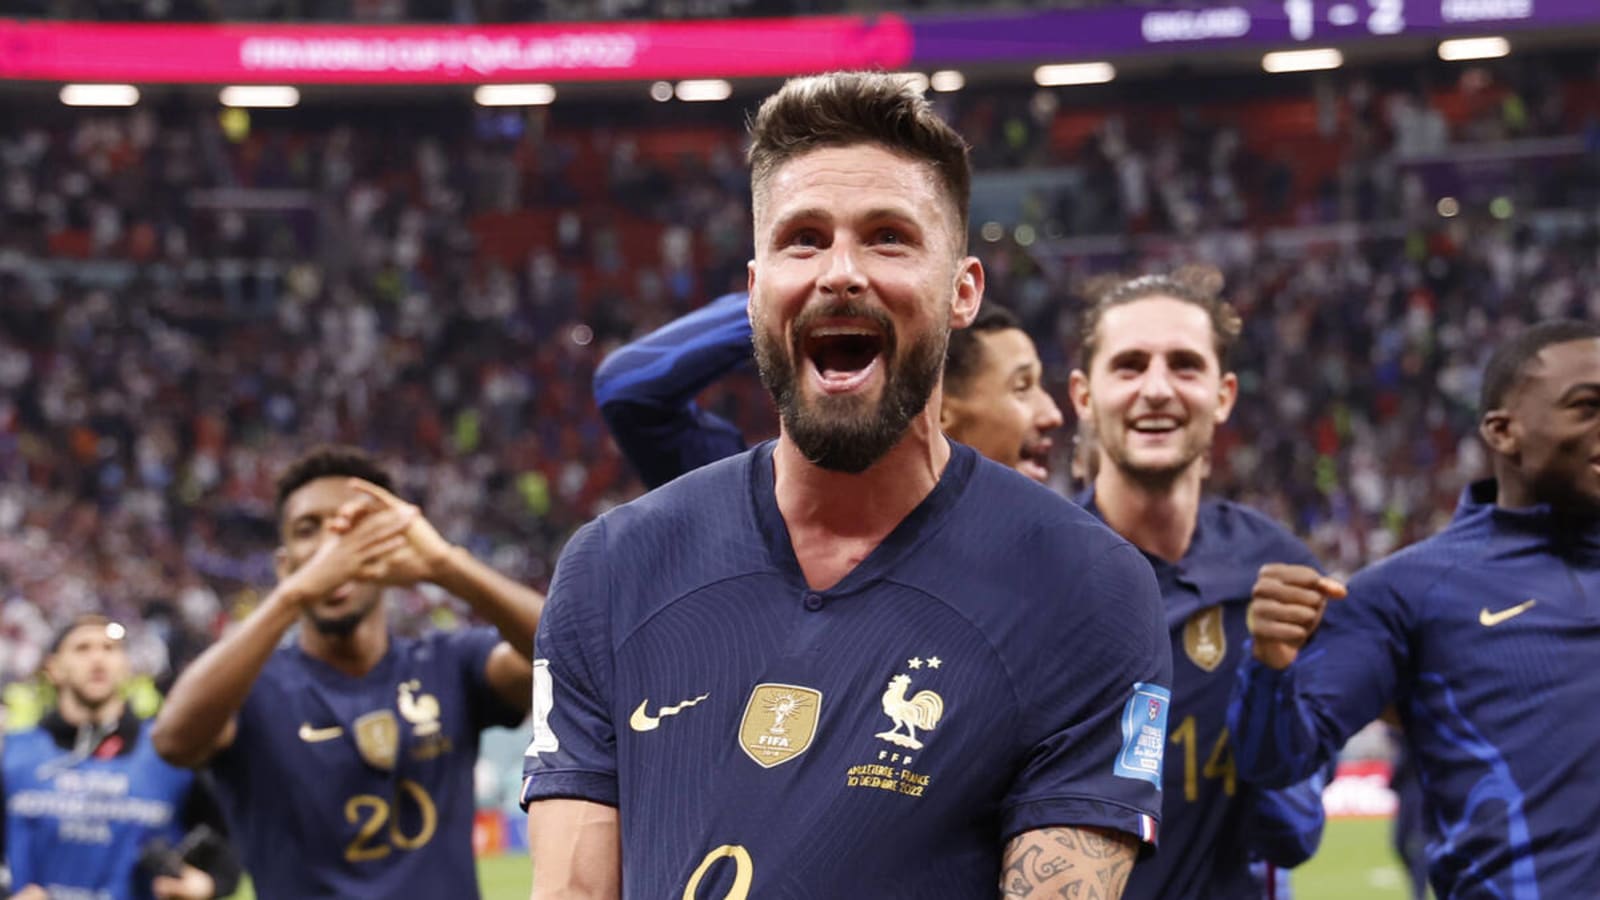 France keeps dream alive of being first repeat World Cup champion in 60 years